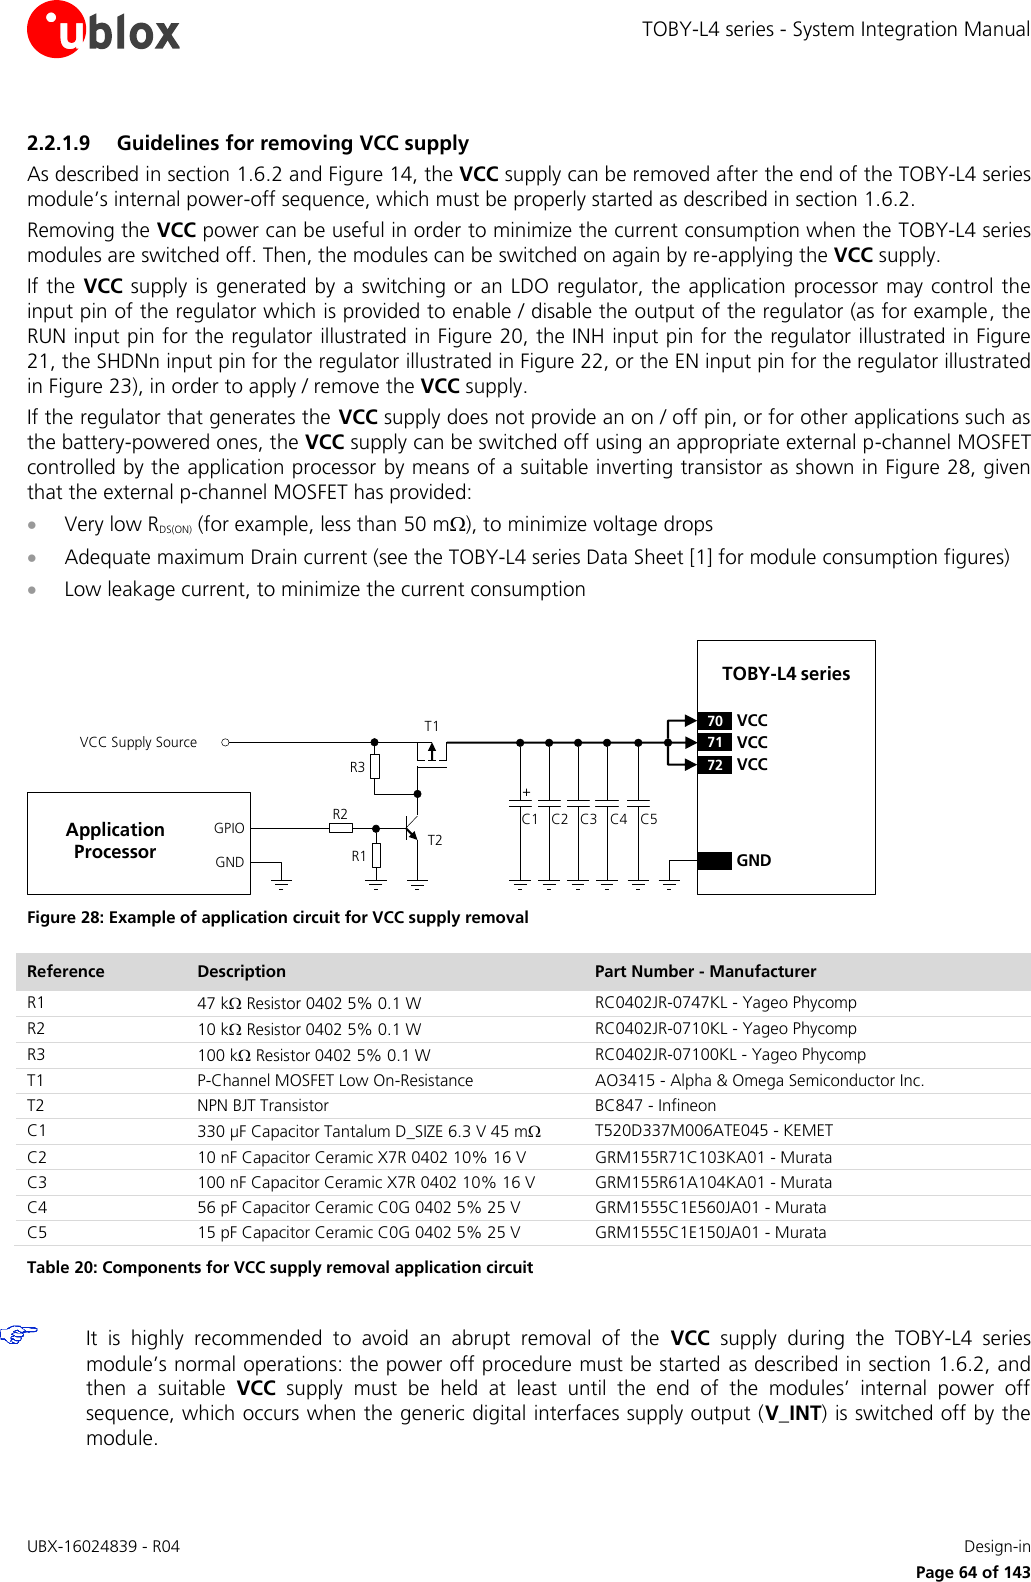 TOBY-L4 series - System Integration Manual UBX-16024839 - R04    Design-in     Page 64 of 143 2.2.1.9 Guidelines for removing VCC supply As described in section 1.6.2 and Figure 14, the VCC supply can be removed after the end of the TOBY-L4 series module’s internal power-off sequence, which must be properly started as described in section 1.6.2.  Removing the VCC power can be useful in order to minimize the current consumption when the TOBY-L4 series modules are switched off. Then, the modules can be switched on again by re-applying the VCC supply. If the VCC supply  is  generated  by a  switching  or  an LDO regulator, the application  processor may control the input pin of the regulator which is provided to enable / disable the output of the regulator (as for example, the RUN input pin for the regulator illustrated in Figure 20, the INH input pin for the regulator illustrated in Figure 21, the SHDNn input pin for the regulator illustrated in Figure 22, or the EN input pin for the regulator illustrated in Figure 23), in order to apply / remove the VCC supply. If the regulator that generates the VCC supply does not provide an on / off pin, or for other applications such as the battery-powered ones, the VCC supply can be switched off using an appropriate external p-channel MOSFET controlled by the application processor by means of a suitable inverting transistor as shown in Figure 28, given that the external p-channel MOSFET has provided:  Very low RDS(ON) (for example, less than 50 m), to minimize voltage drops   Adequate maximum Drain current (see the TOBY-L4 series Data Sheet [1] for module consumption figures)  Low leakage current, to minimize the current consumption  C3GNDC2C1 C4TOBY-L4 series71 VCC72 VCC70 VCC+VCC Supply SourceGNDGPIO C5R1R3R2T2T1Application Processor Figure 28: Example of application circuit for VCC supply removal Reference Description Part Number - Manufacturer R1 47 k Resistor 0402 5% 0.1 W  RC0402JR-0747KL - Yageo Phycomp R2 10 k Resistor 0402 5% 0.1 W  RC0402JR-0710KL - Yageo Phycomp R3 100 k Resistor 0402 5% 0.1 W  RC0402JR-07100KL - Yageo Phycomp T1 P-Channel MOSFET Low On-Resistance AO3415 - Alpha &amp; Omega Semiconductor Inc.  T2 NPN BJT Transistor BC847 - Infineon C1 330 µF Capacitor Tantalum D_SIZE 6.3 V 45 m T520D337M006ATE045 - KEMET C2 10 nF Capacitor Ceramic X7R 0402 10% 16 V GRM155R71C103KA01 - Murata C3 100 nF Capacitor Ceramic X7R 0402 10% 16 V GRM155R61A104KA01 - Murata C4 56 pF Capacitor Ceramic C0G 0402 5% 25 V GRM1555C1E560JA01 - Murata C5 15 pF Capacitor Ceramic C0G 0402 5% 25 V  GRM1555C1E150JA01 - Murata Table 20: Components for VCC supply removal application circuit   It  is  highly  recommended  to  avoid  an  abrupt  removal  of  the  VCC  supply  during  the  TOBY-L4  series module’s normal operations: the power off procedure must be started as described in section 1.6.2, and then  a  suitable  VCC  supply  must  be  held  at  least  until  the  end  of  the  modules’  internal  power  off sequence, which occurs when the generic digital interfaces supply output (V_INT) is switched off by the module.  